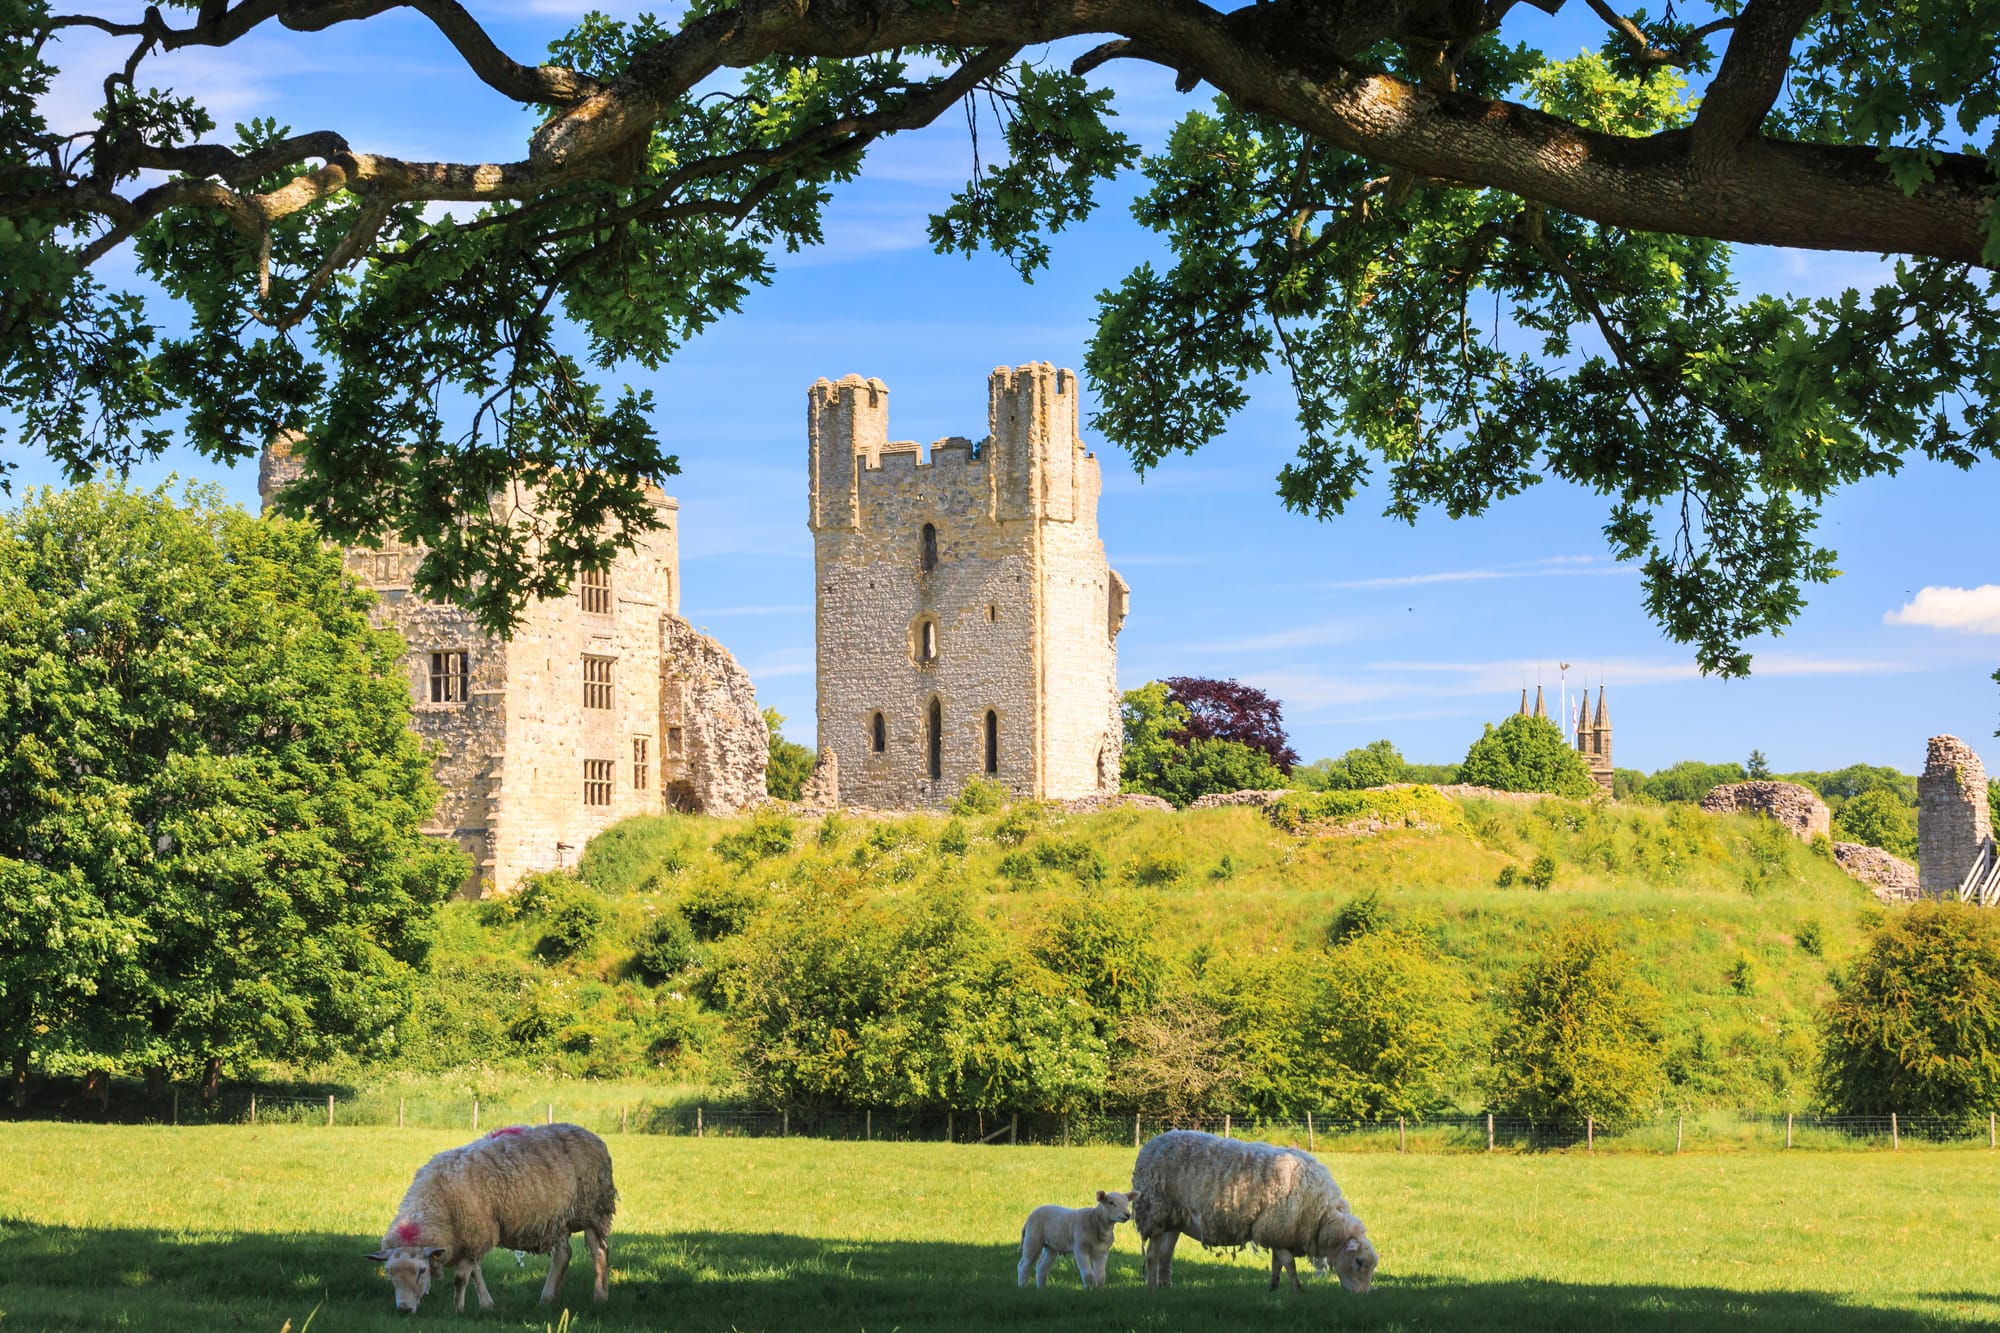 Things to Do in Helmsley: A Guide to the Town's Must-See Attractions